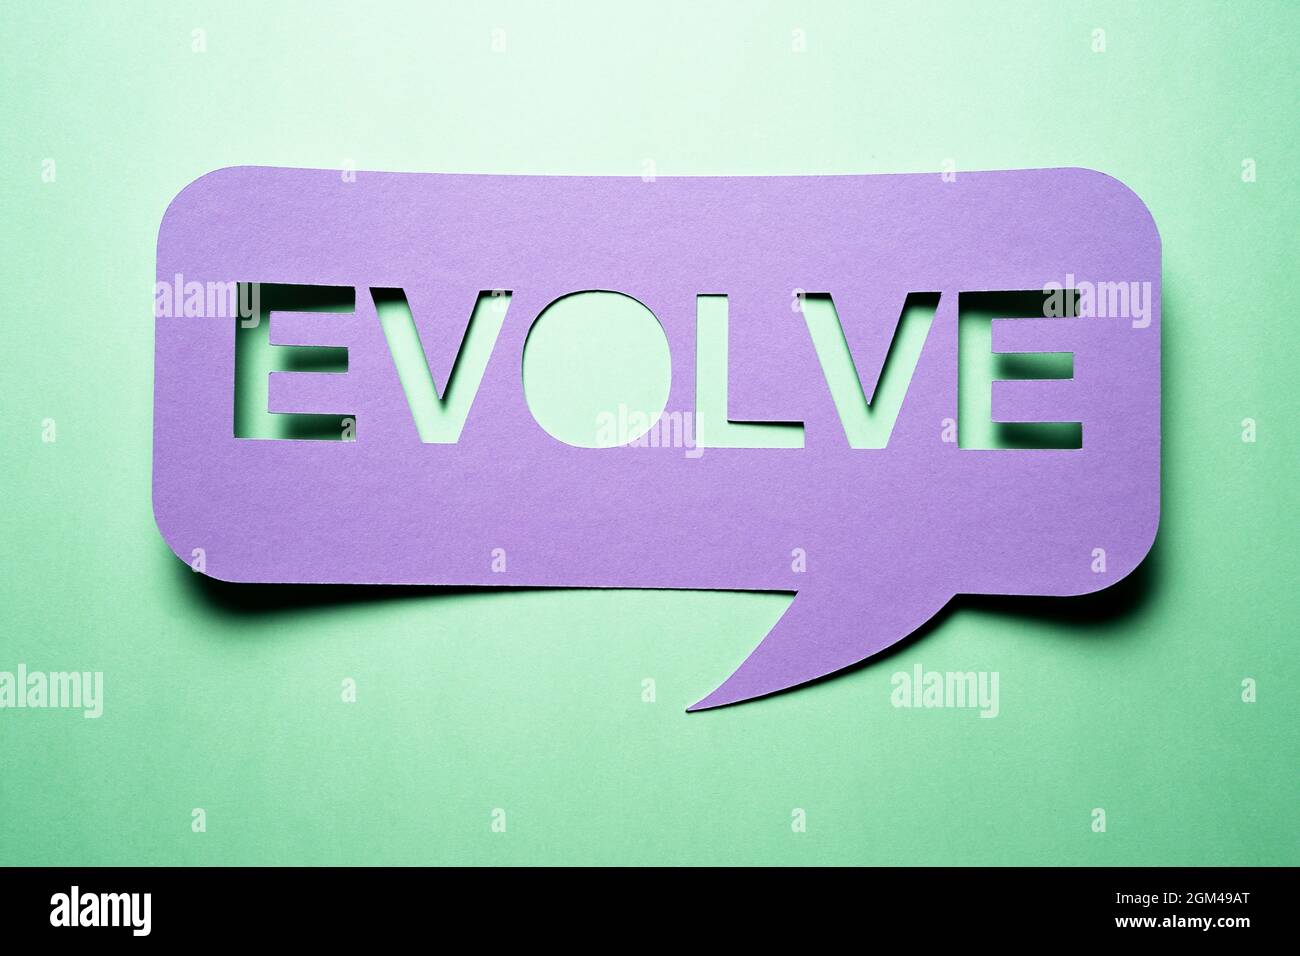 Evolve Business, Change, Rethink And Innovate Speech Bubble Stock Photo